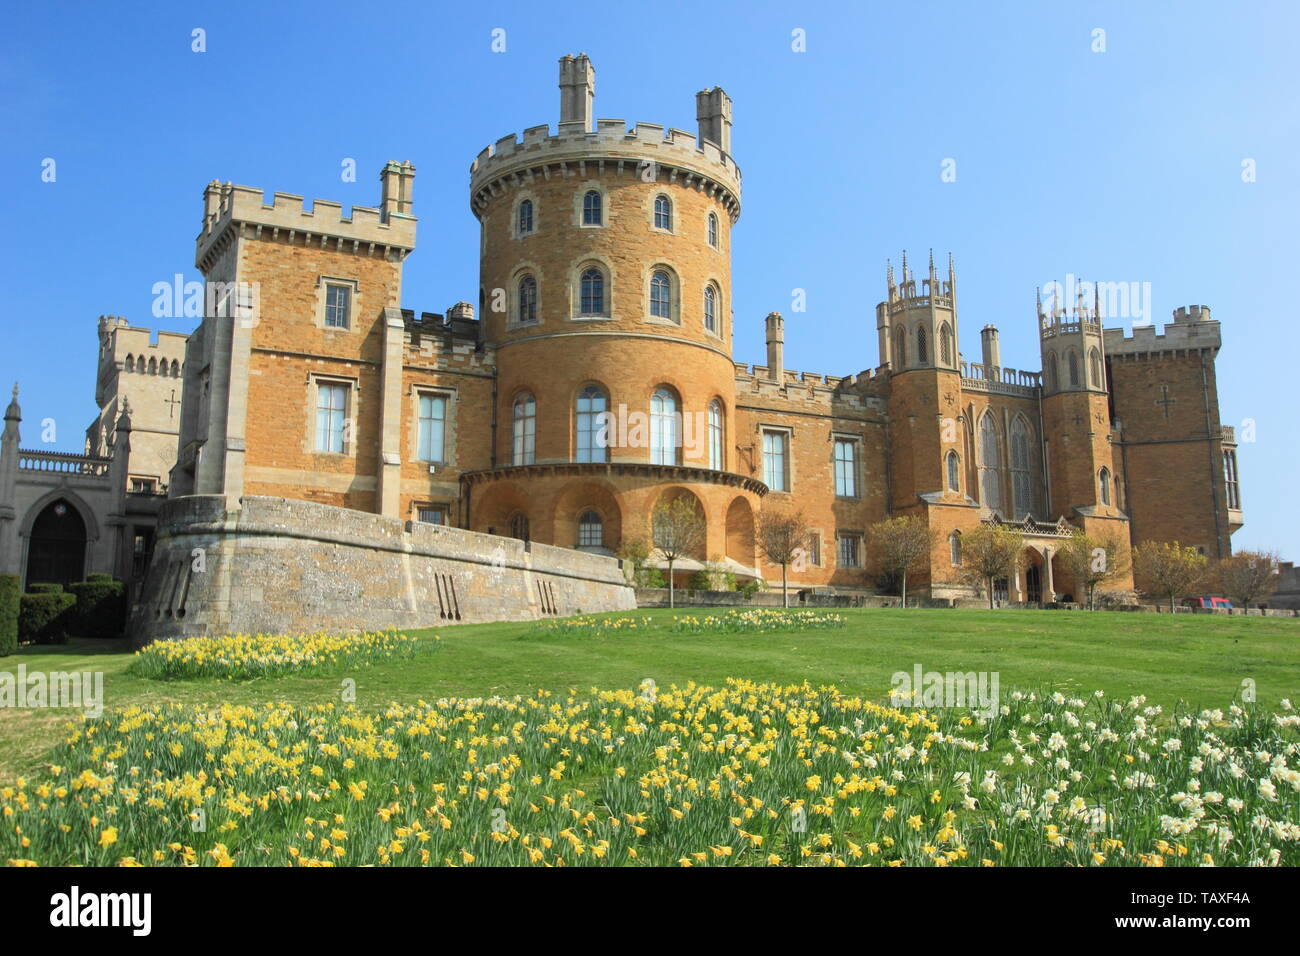 Belvoir Castle, seat of the Duke of Rutland, Leicestershire, England, UK - spring Stock Photo